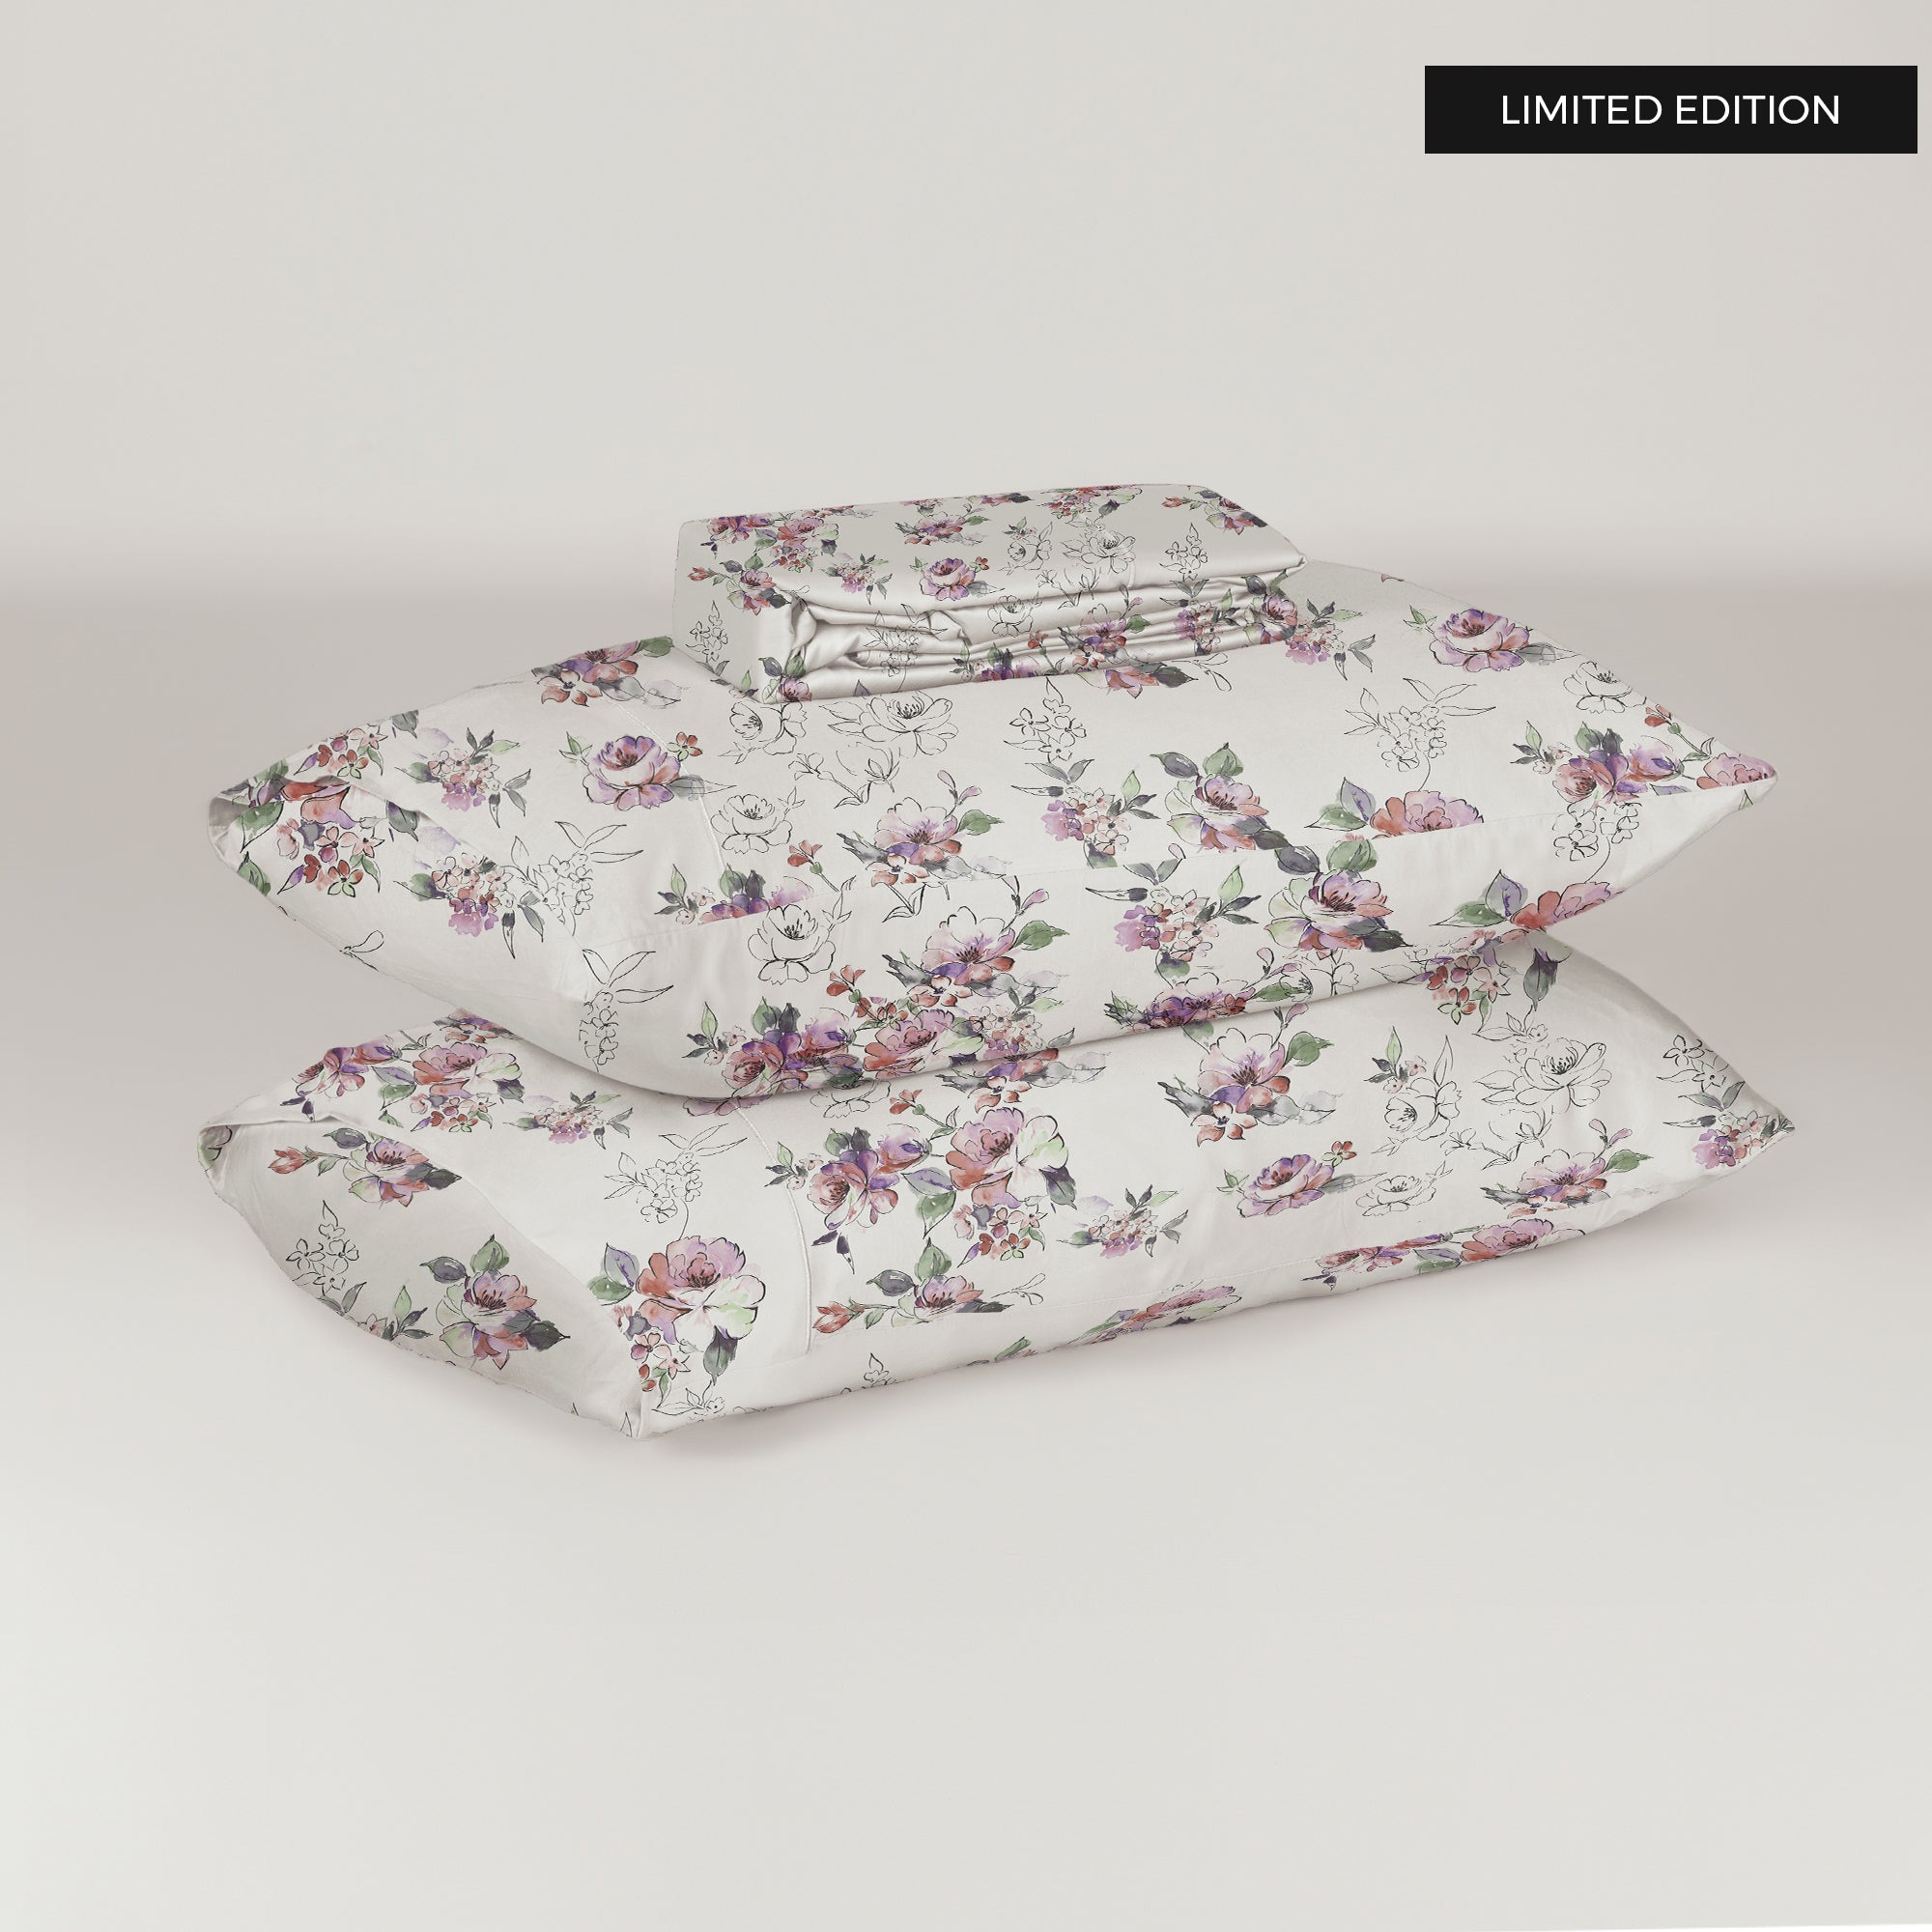 The Linen Company Bedding Victorian Rose Bed Sheet Set Victorian Rose Bed Sheet Set | Bedding